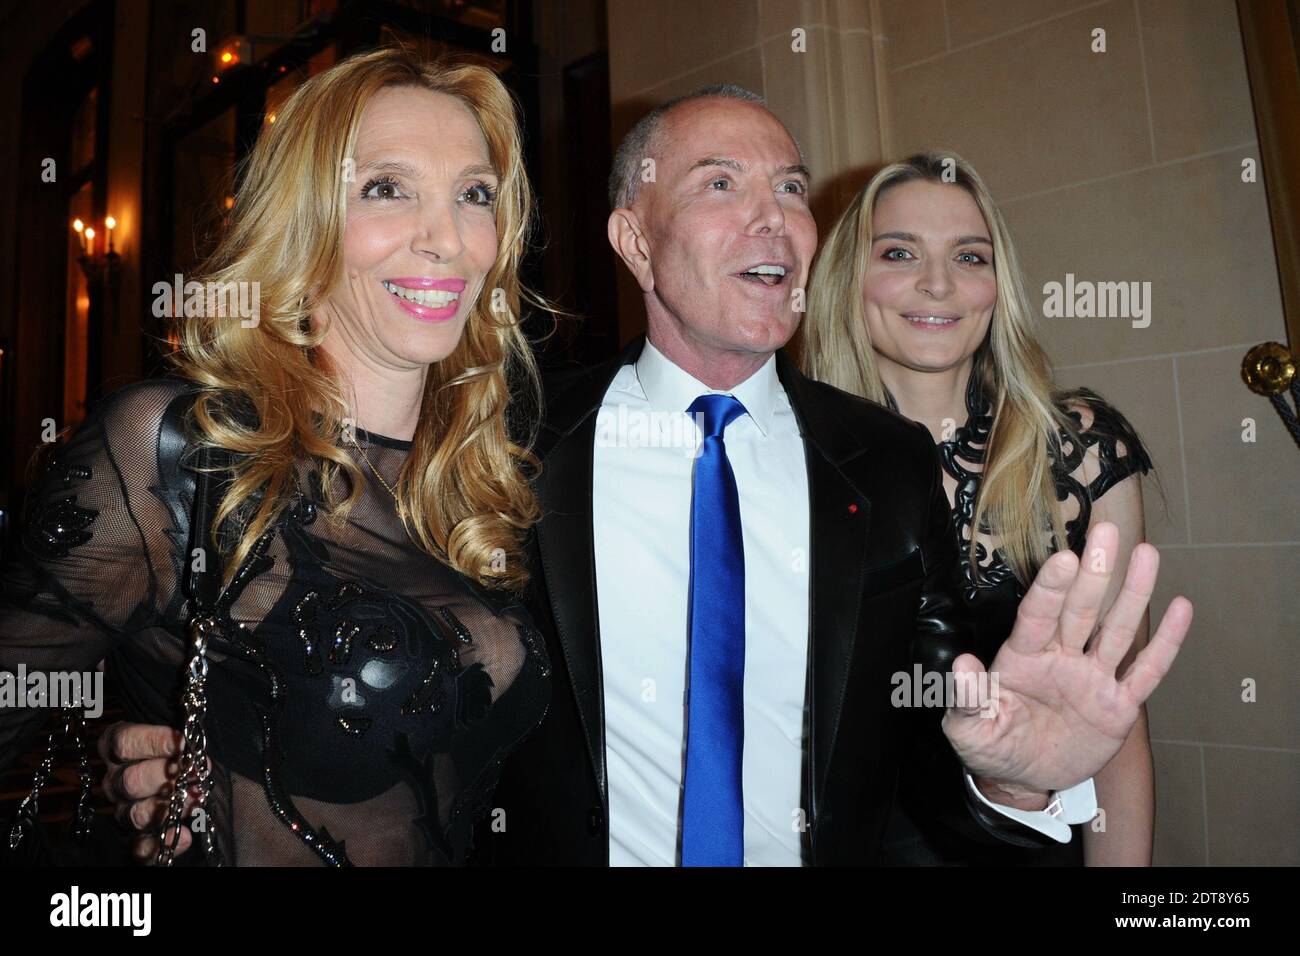 Sylvie Elias (Sarah Marshall's mother), Jean-Claude Jitrois and Sarah  Marshall attending the fundraiser for the rebuild of the Chateau de Saint-Cloud  held at the Cercle de l'Union Interalliee, in Paris, France, on